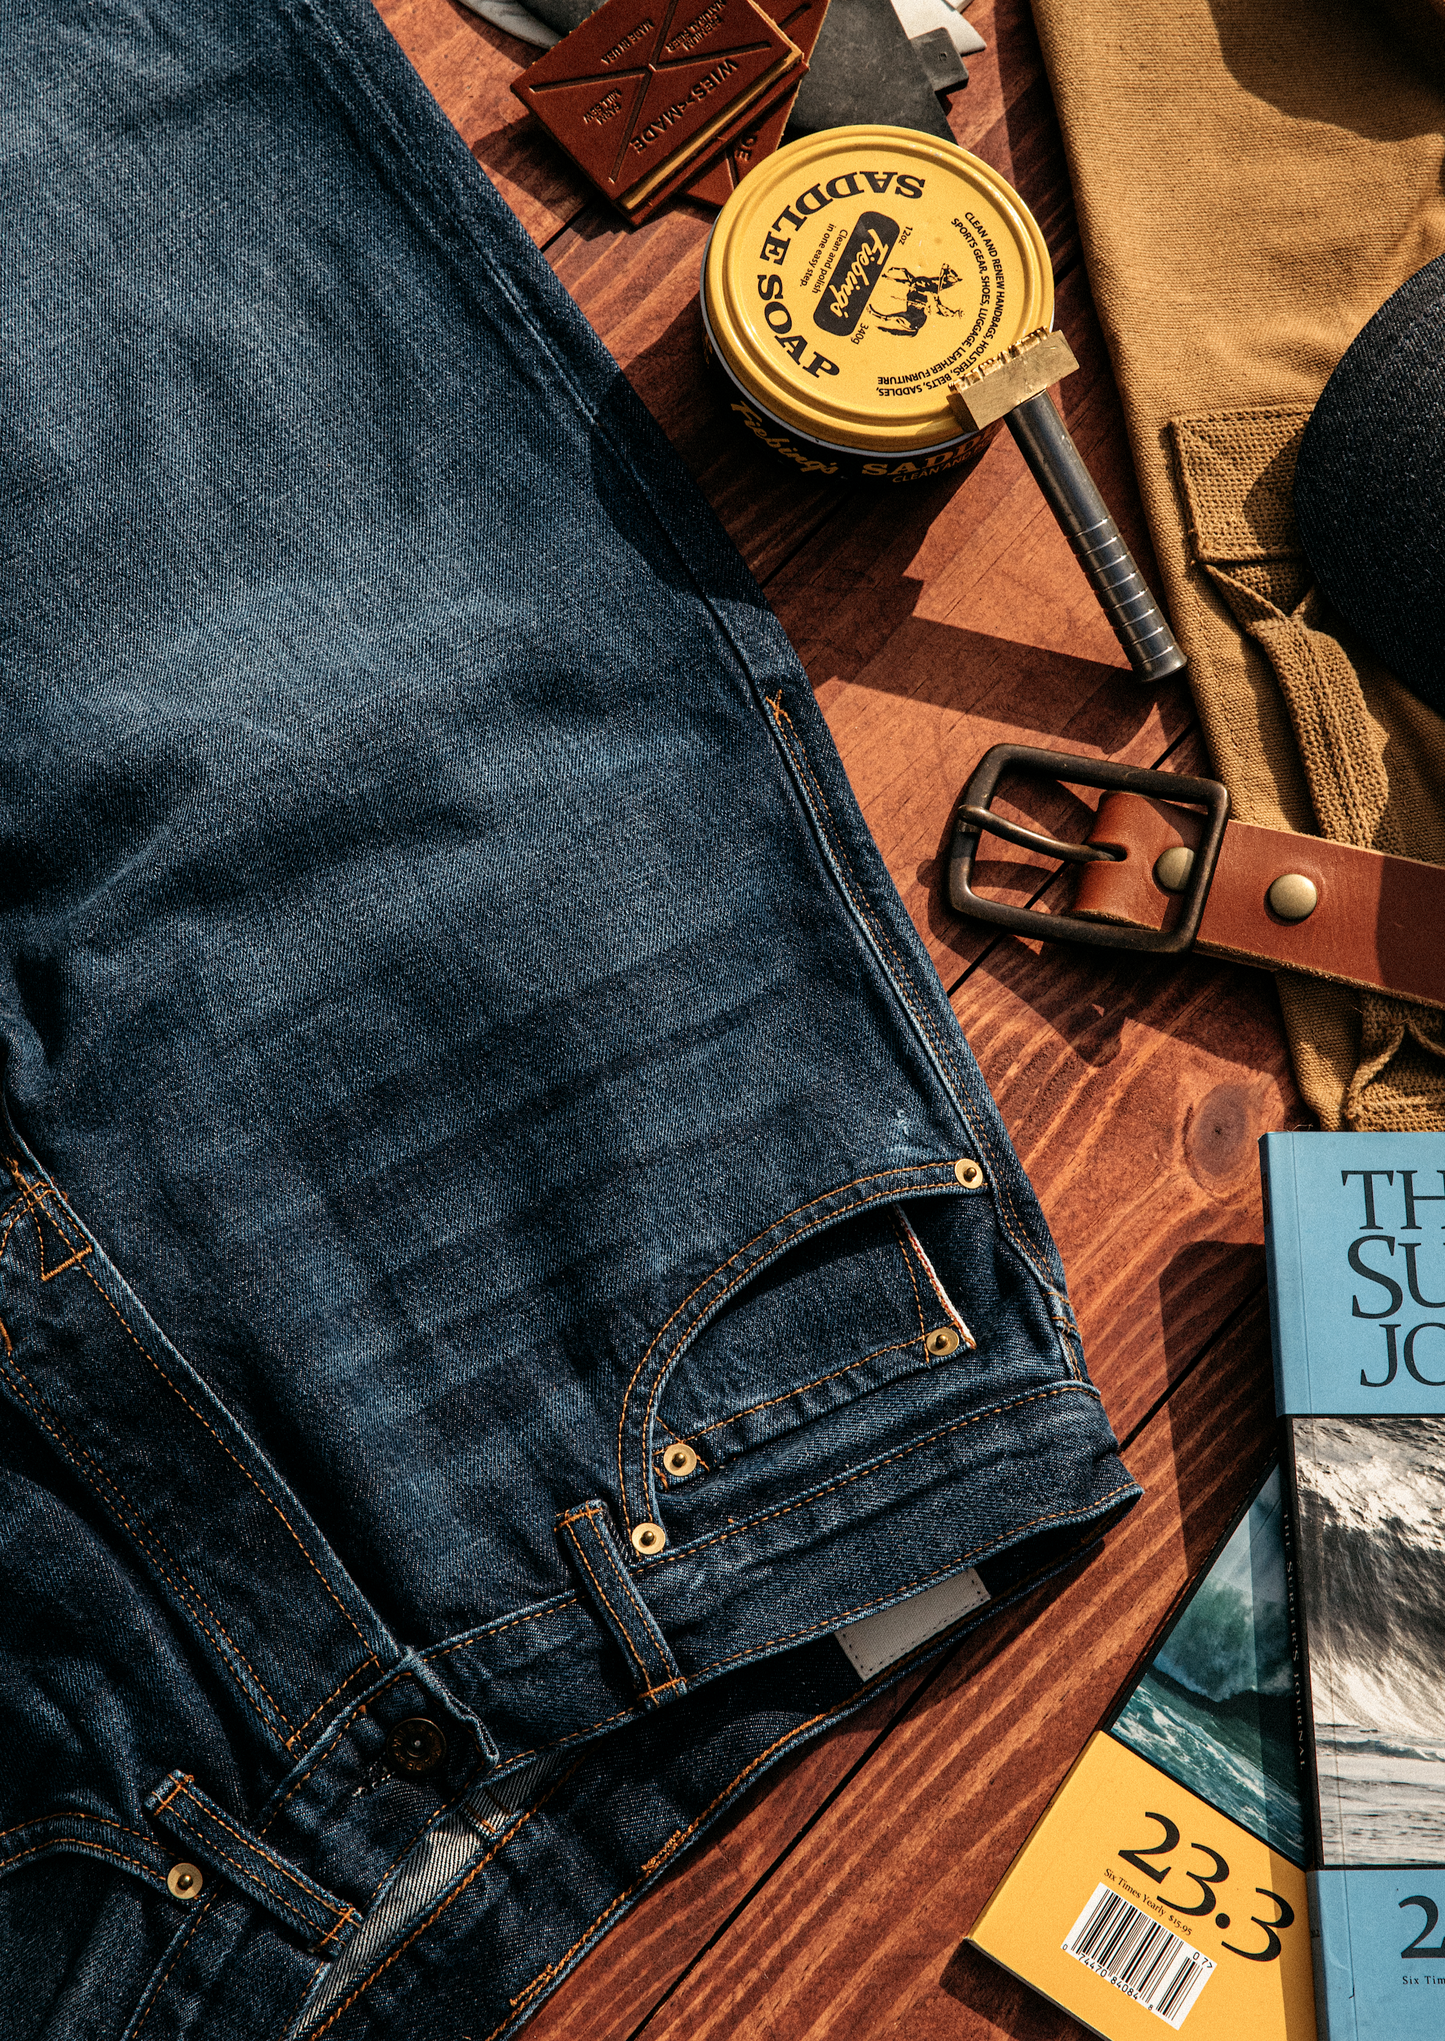 Jack Fit Jeans | Washed Selvedge Denim Straight Cut